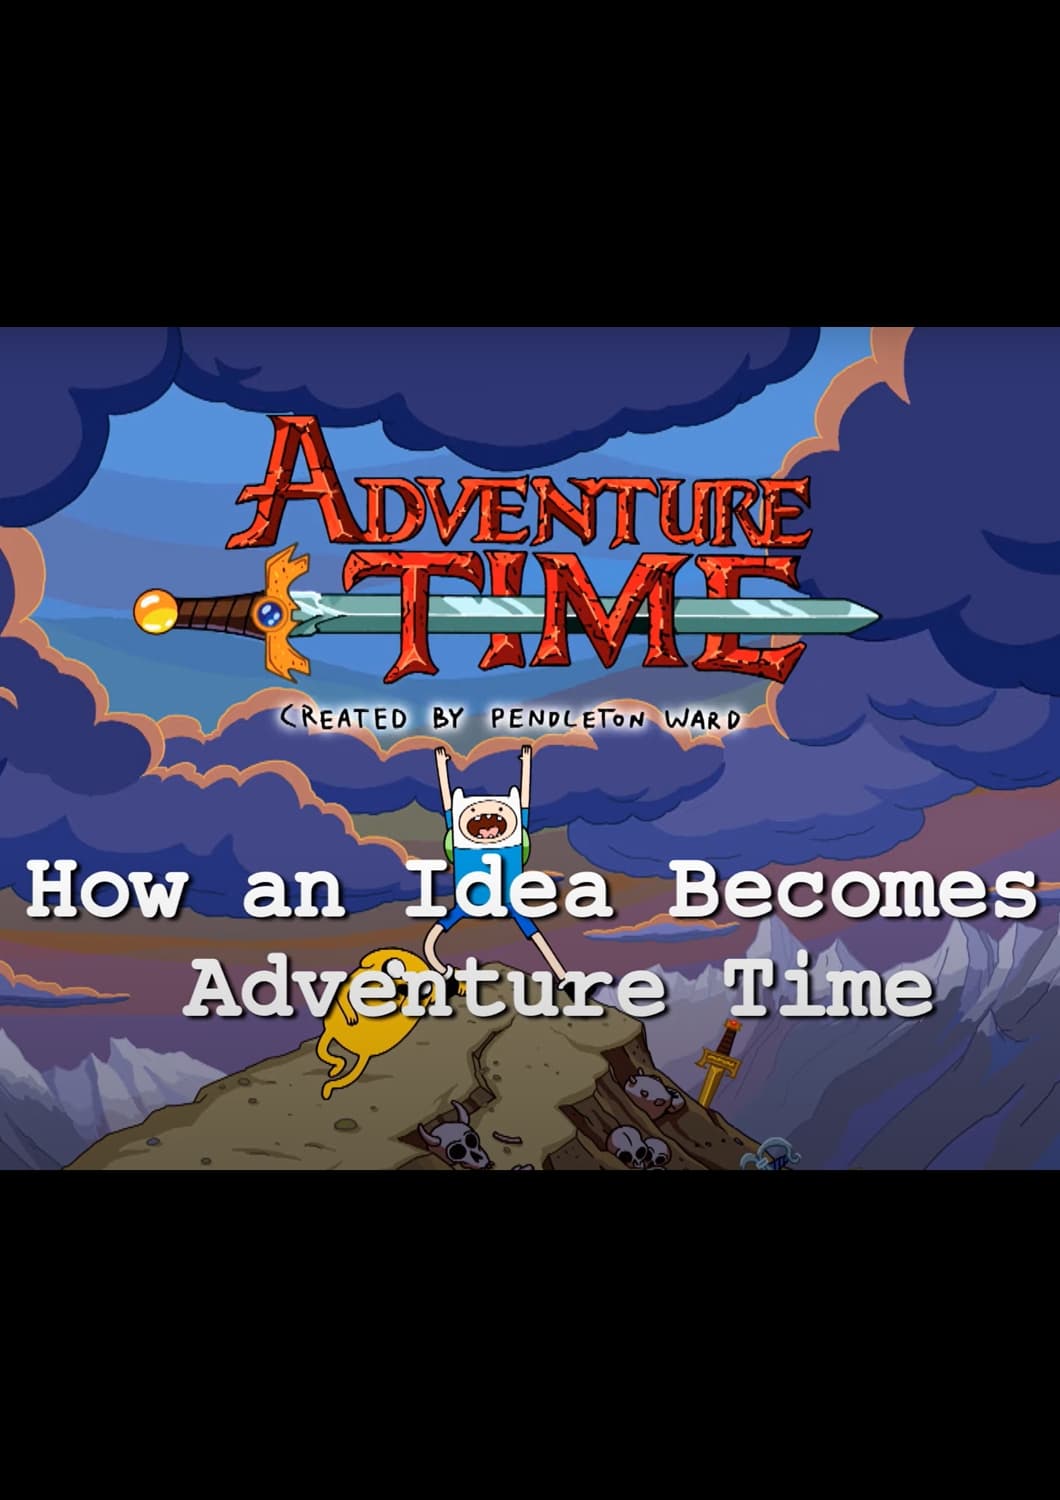 How an Idea Becomes Adventure Time